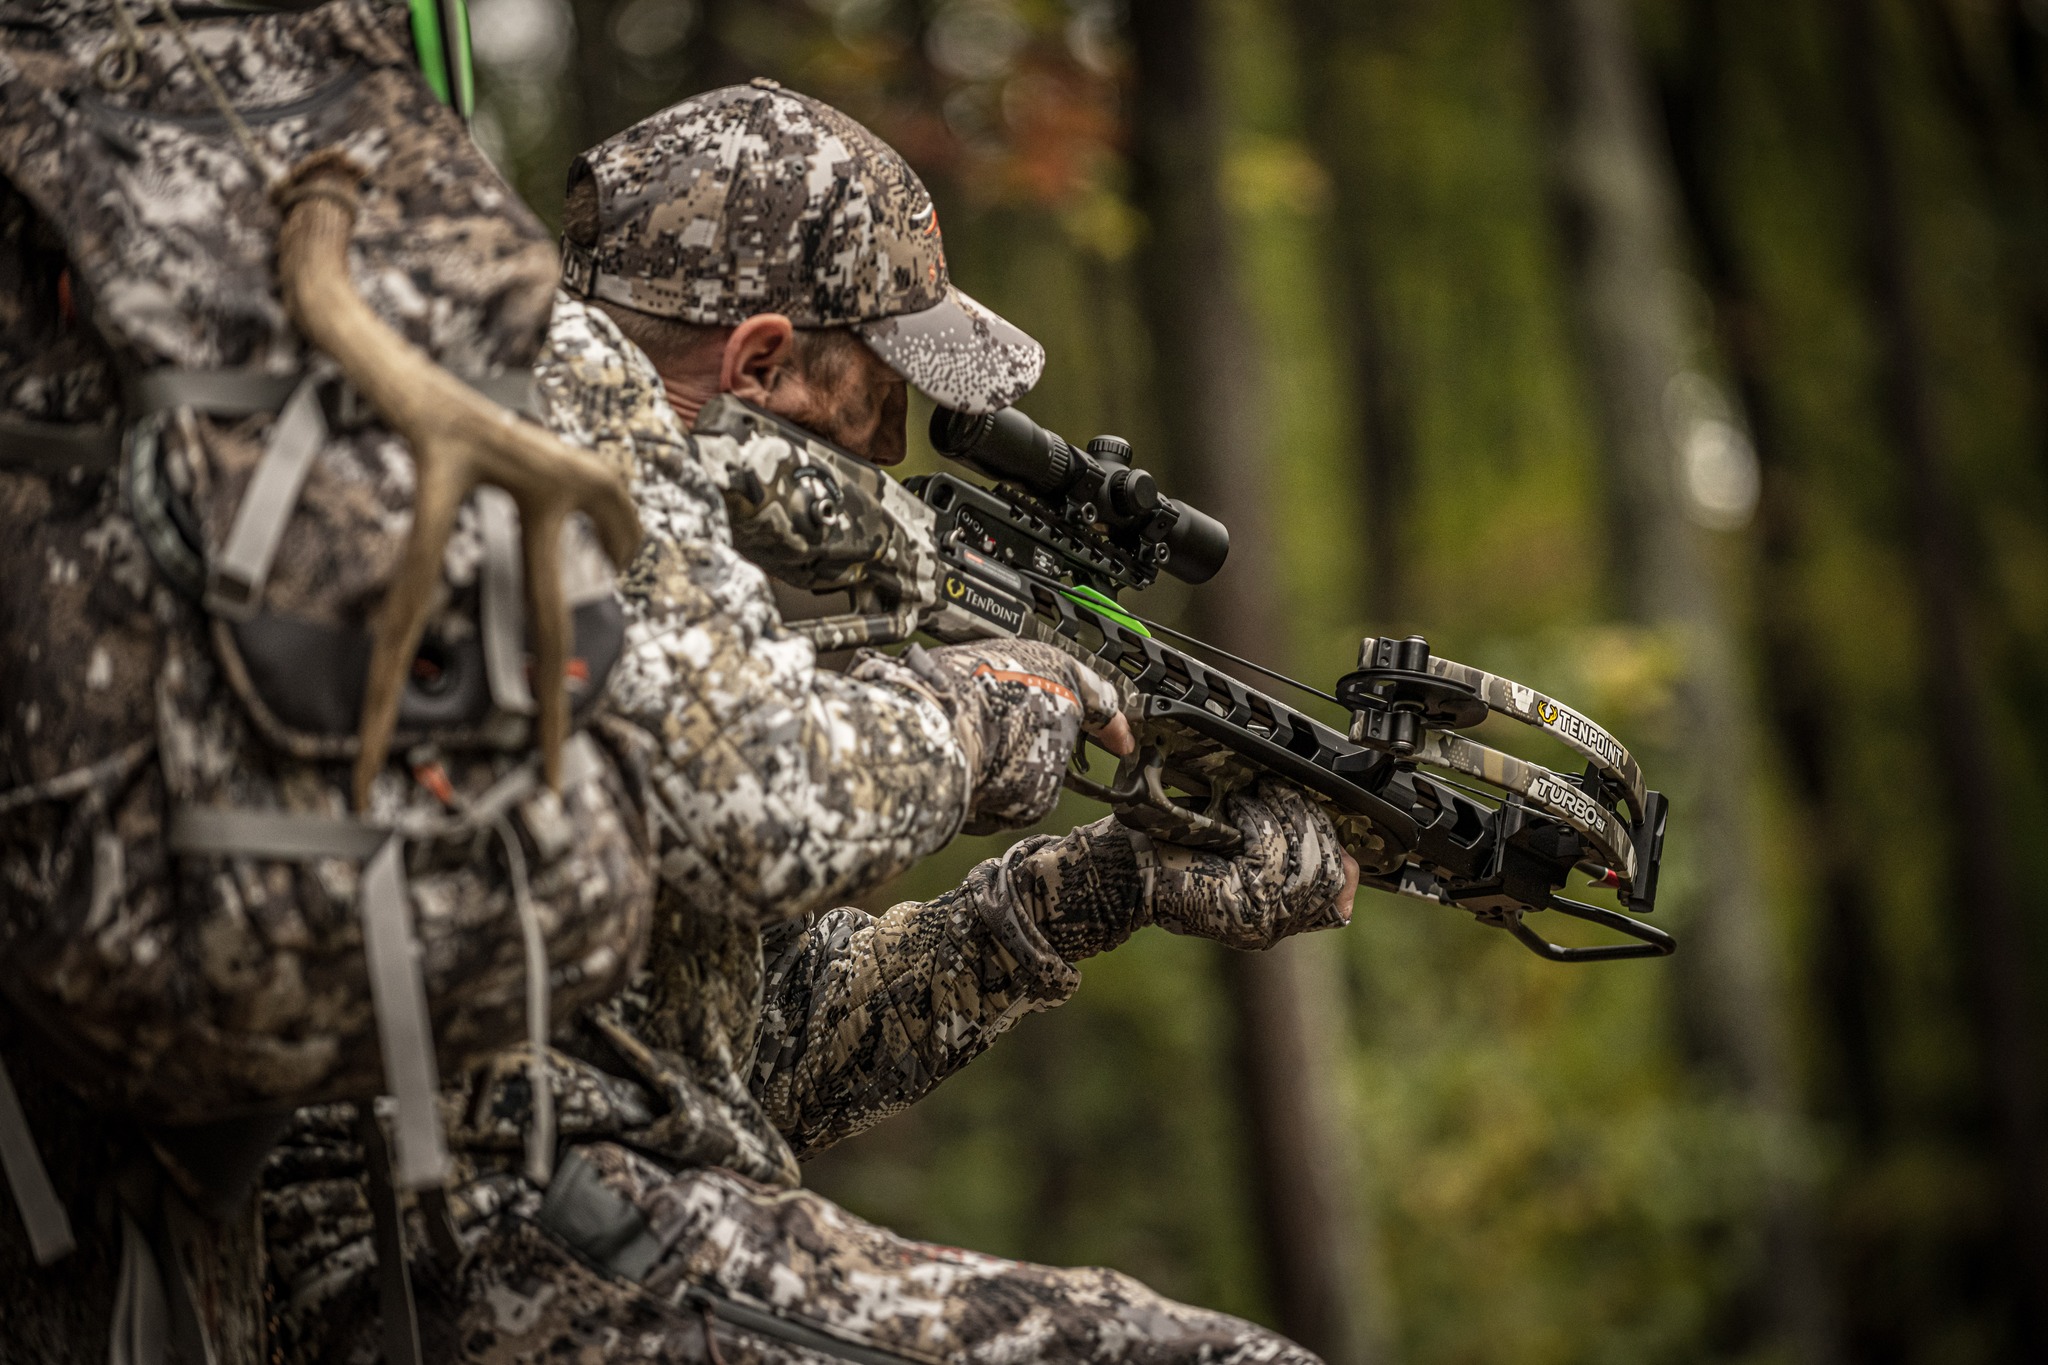 Crossbows for all during 2023 archery season: How did we get here, and where will it lead? 